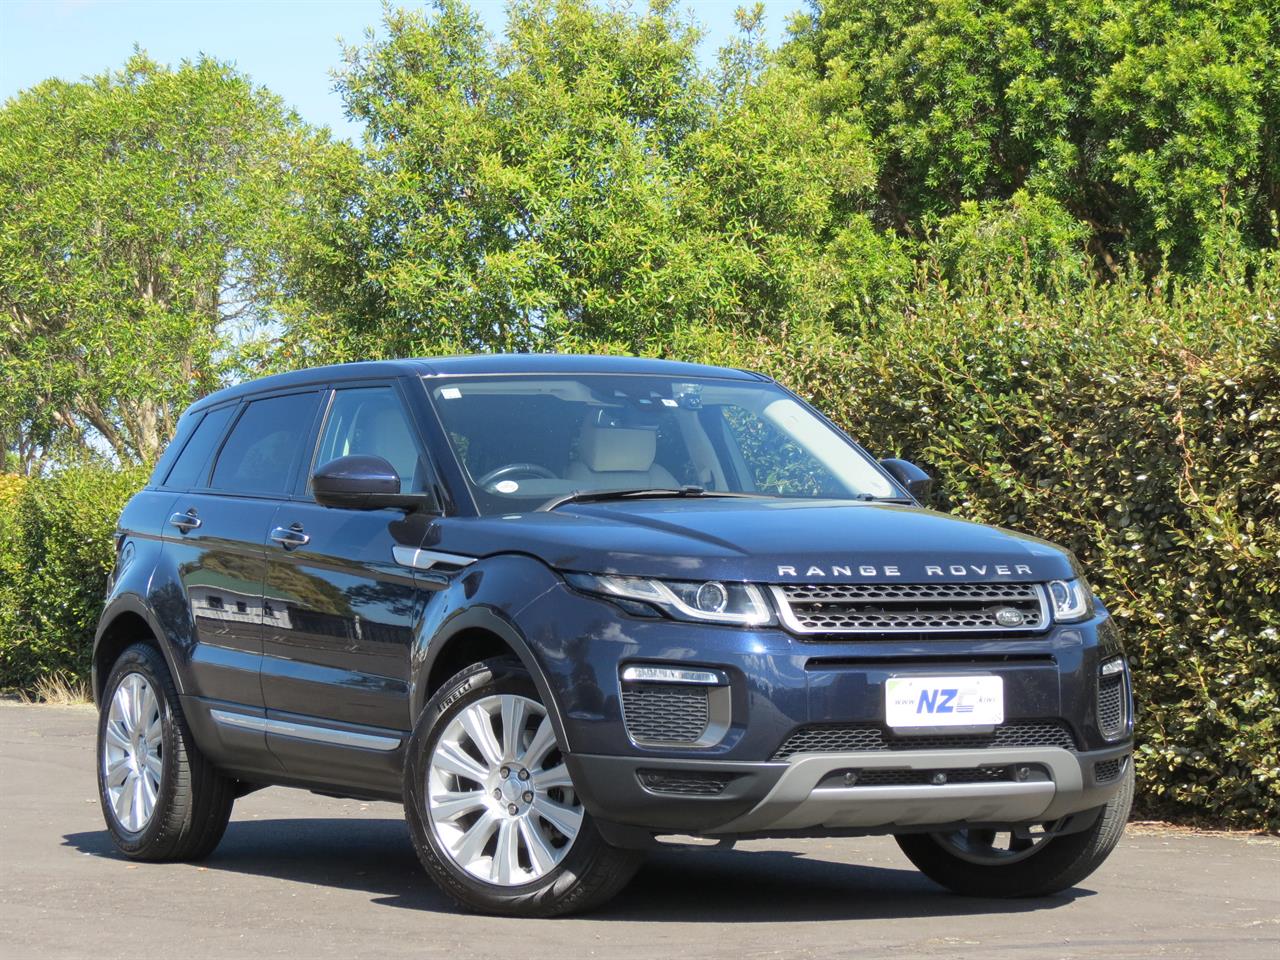 NZC 2016 Land Rover Range Rover Evoque just arrived to Auckland